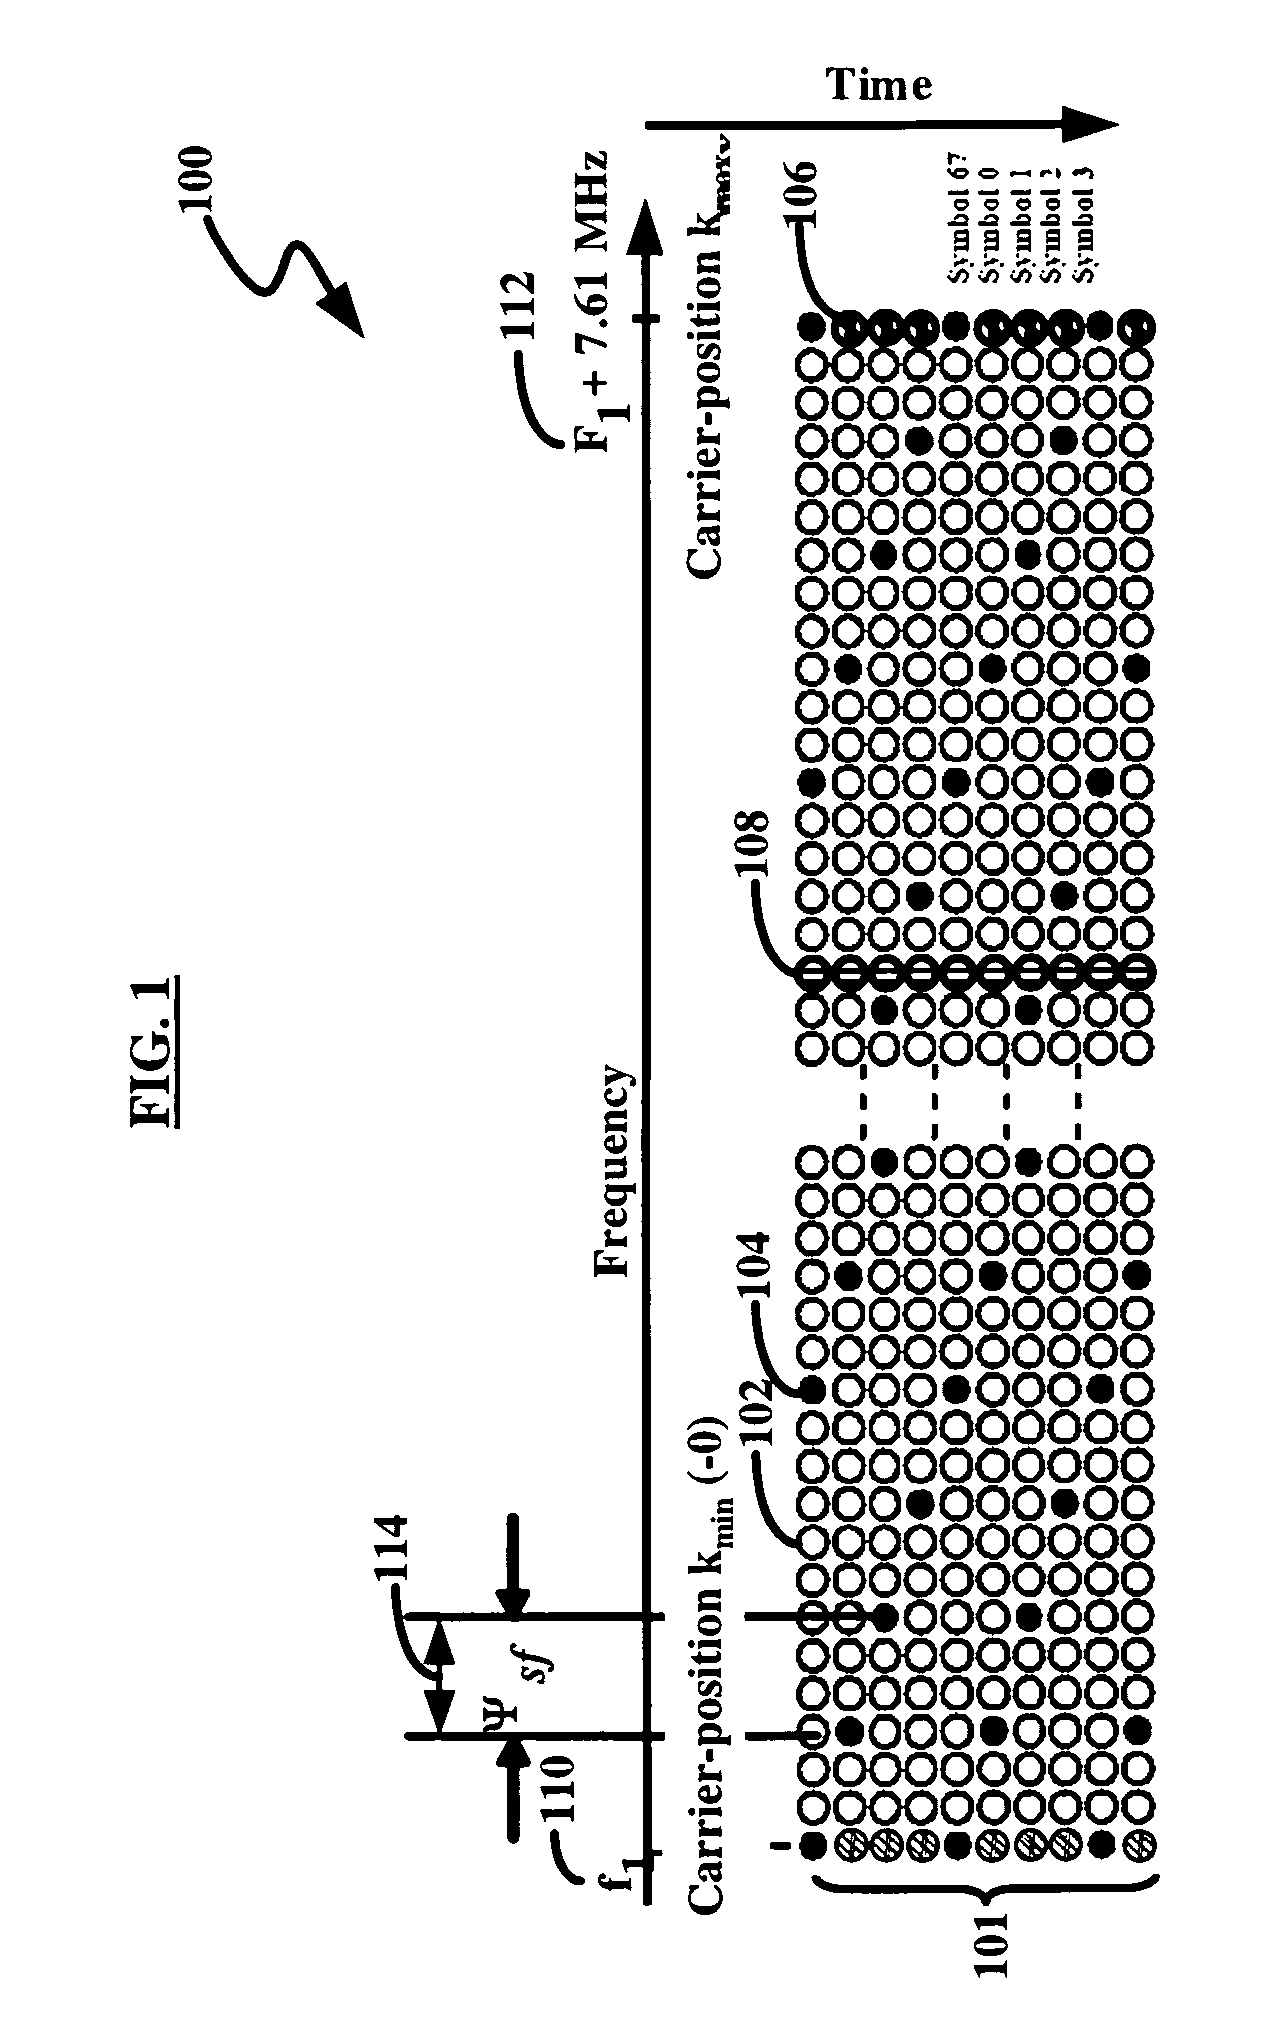 Adaptive frequency domain equalization in OFDM based communication system